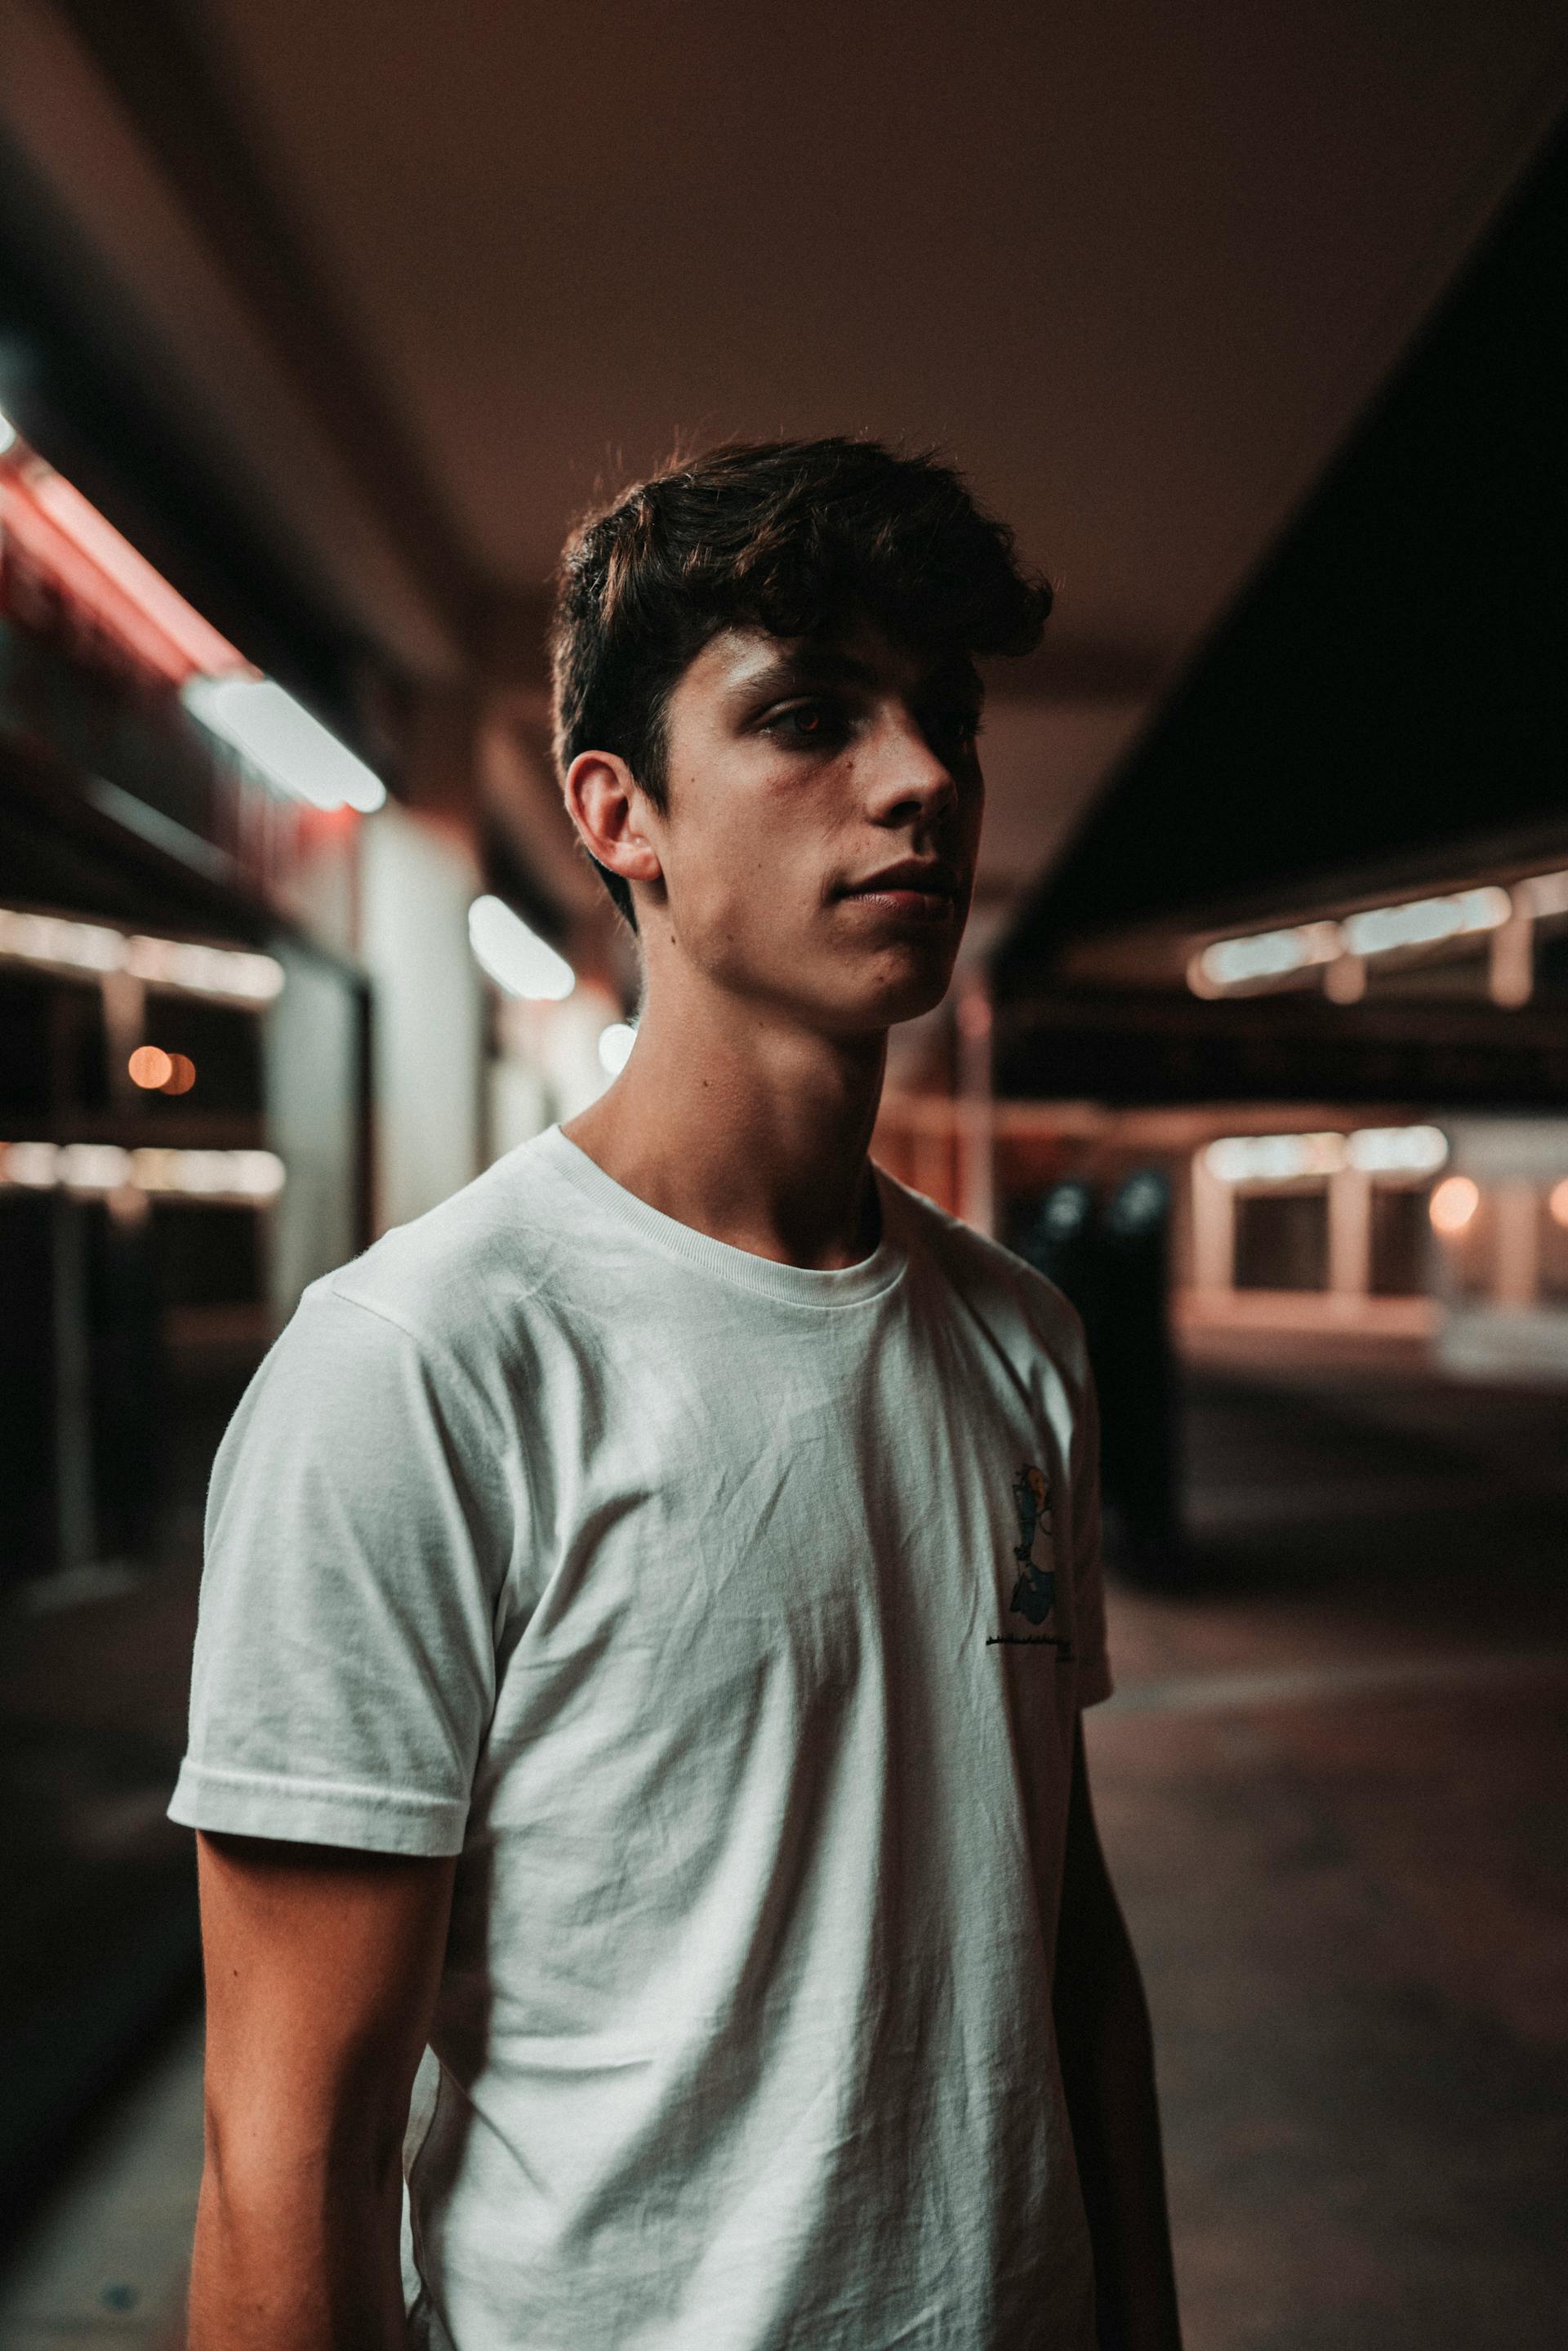 A young man standing in a parking lot | Source: Pexels